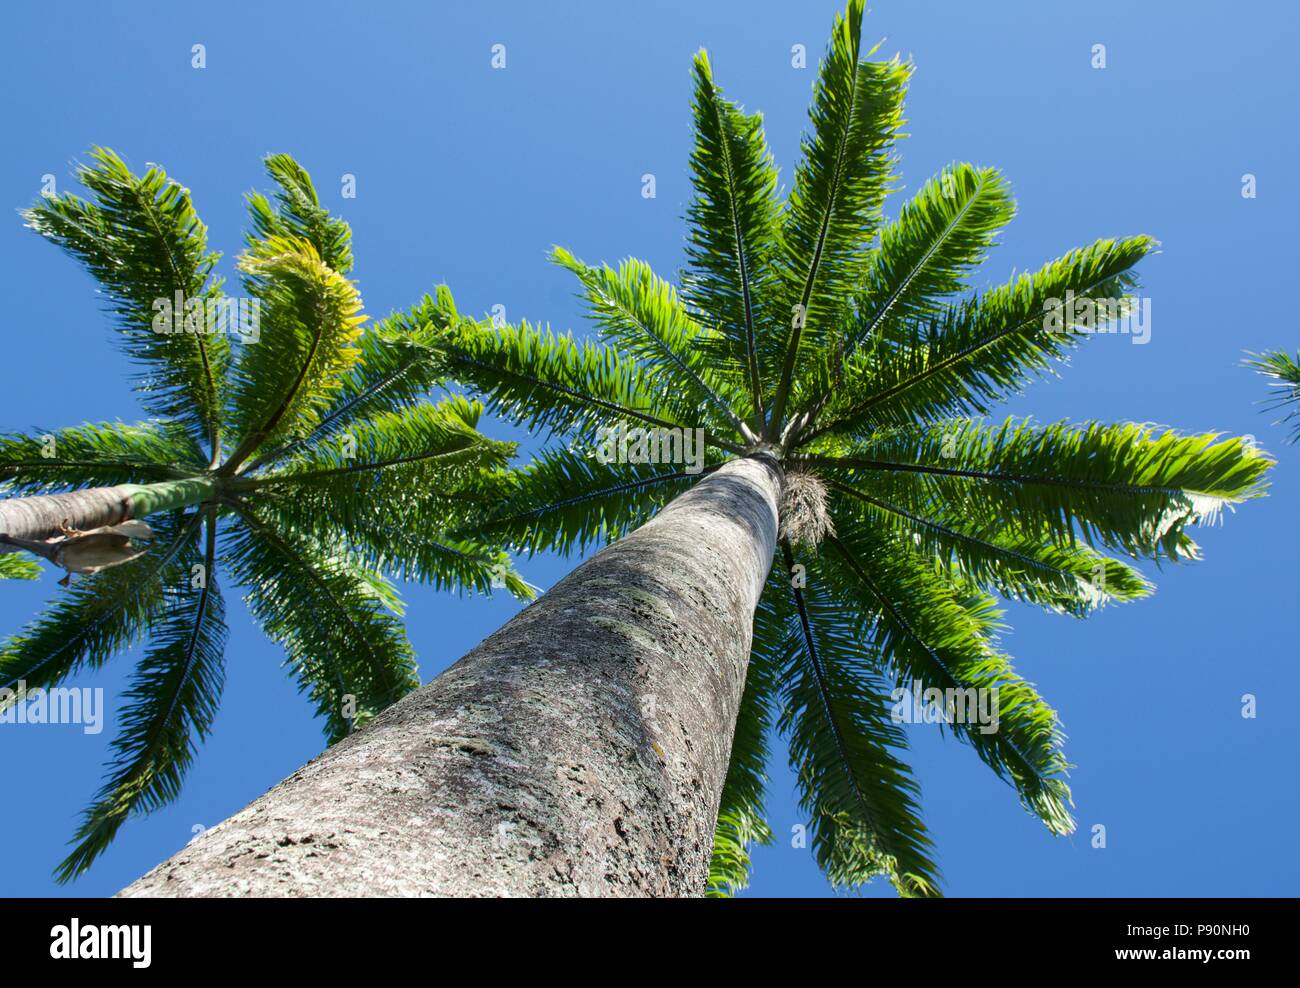 Avenue of Cuban Royal Palm Palms  with tall trunks and brilliant green fronds agains a clear blue sky Stock Photo